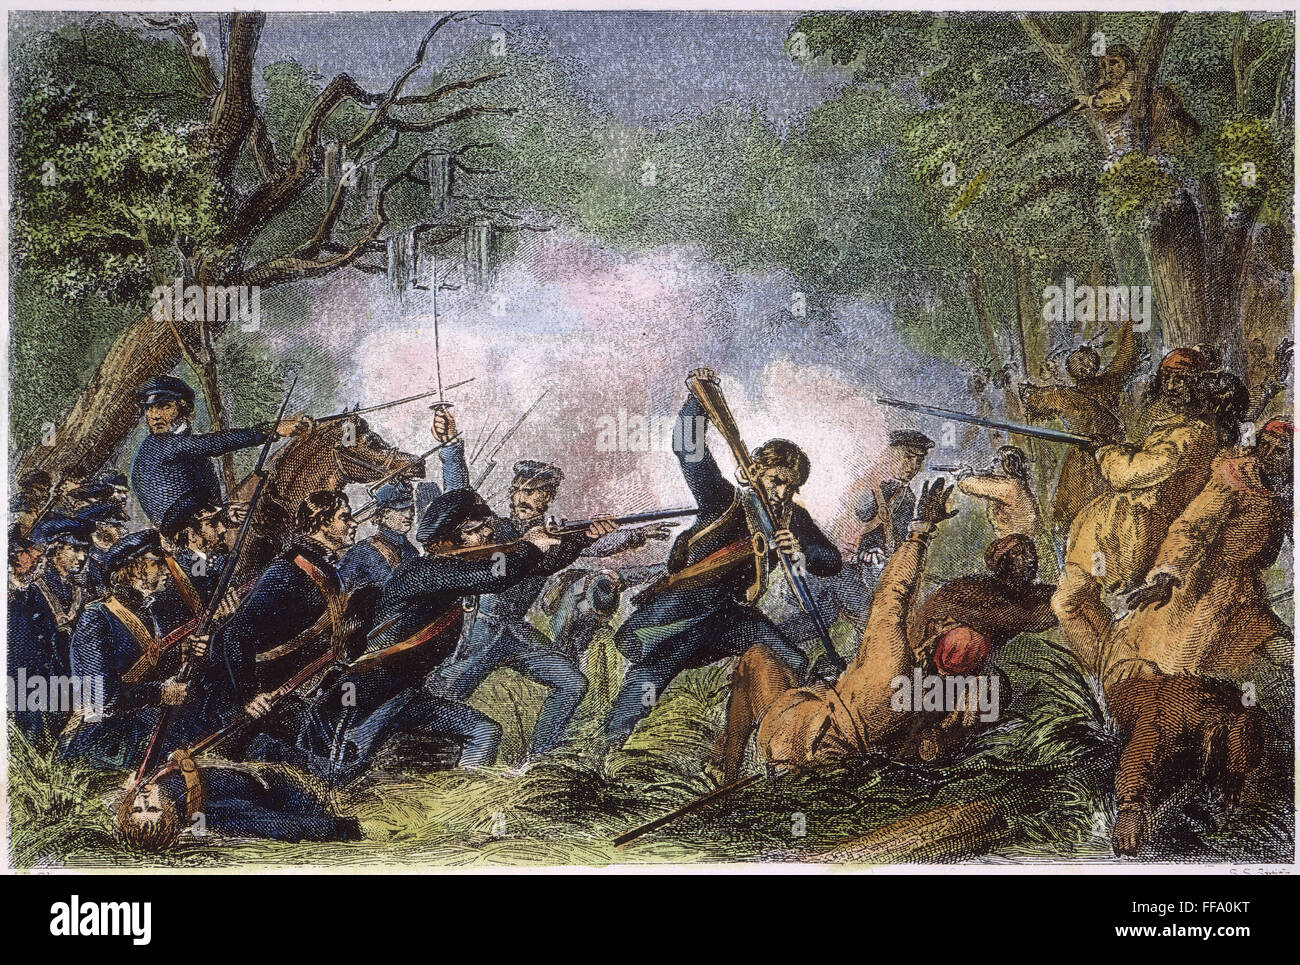 ZACHARY TAYLOR (1784-1850). /nColonel Zachary Taylor and his men defeat the Seminole Native Americans at Lake Okeechobee, Florida, 25 December 1837. Steel engraving, 1860. Stock Photo